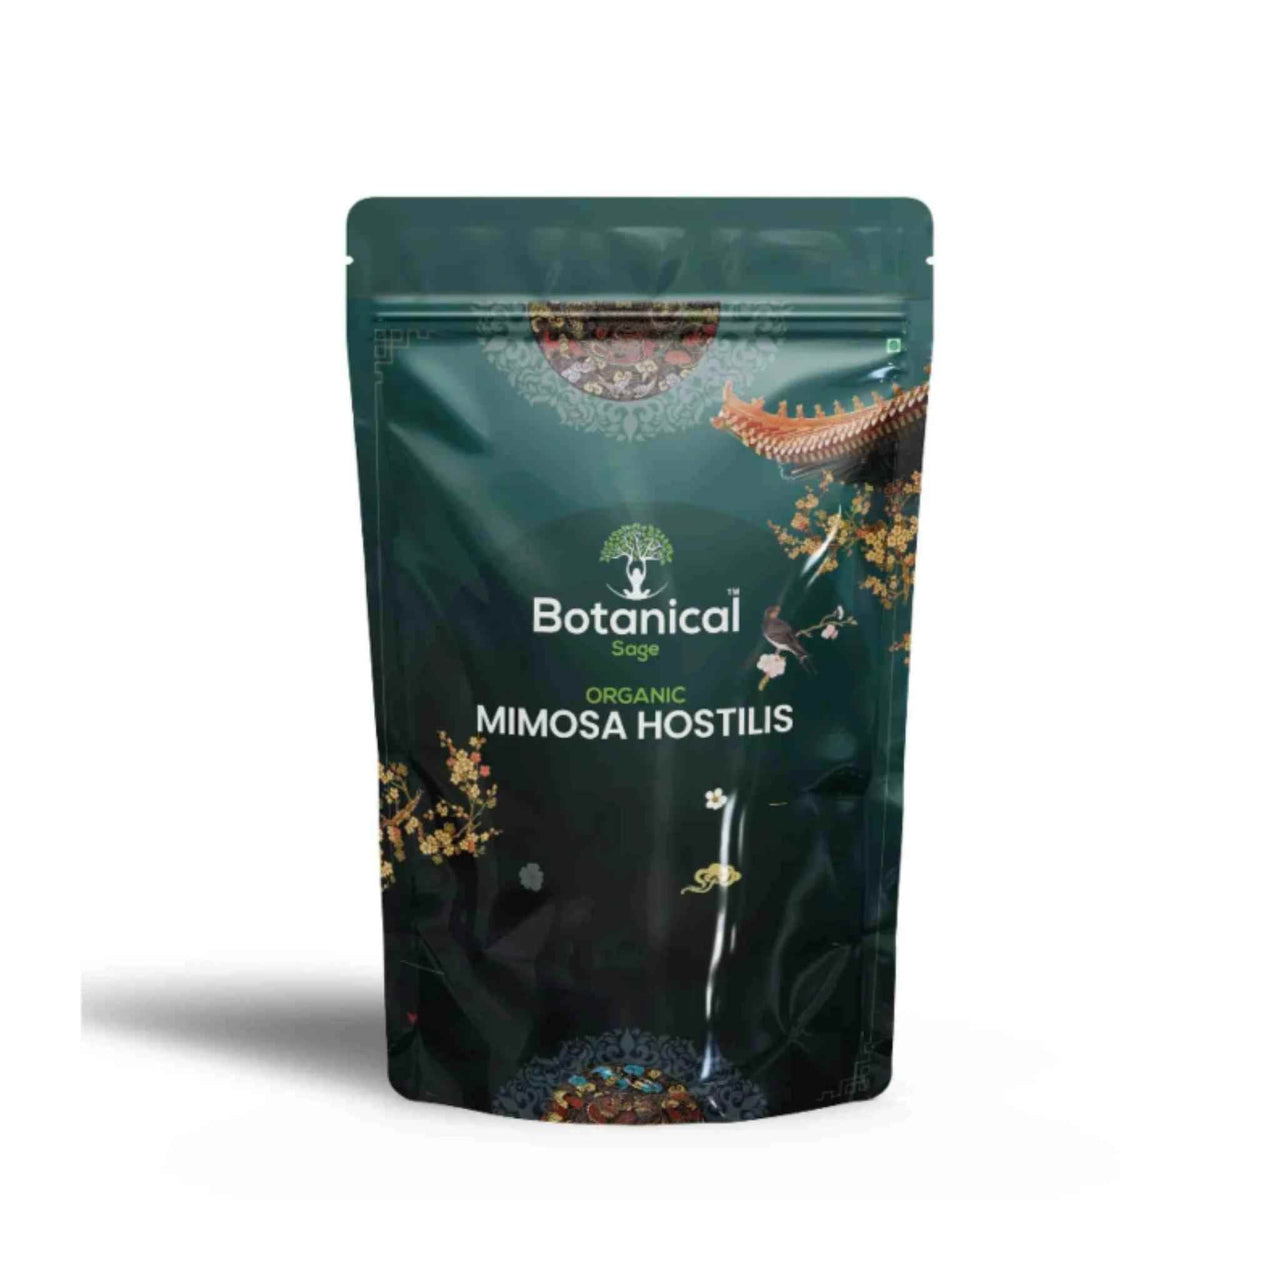 Leanbeing Healthcare - Morning Glory Seeds - CBD Store India